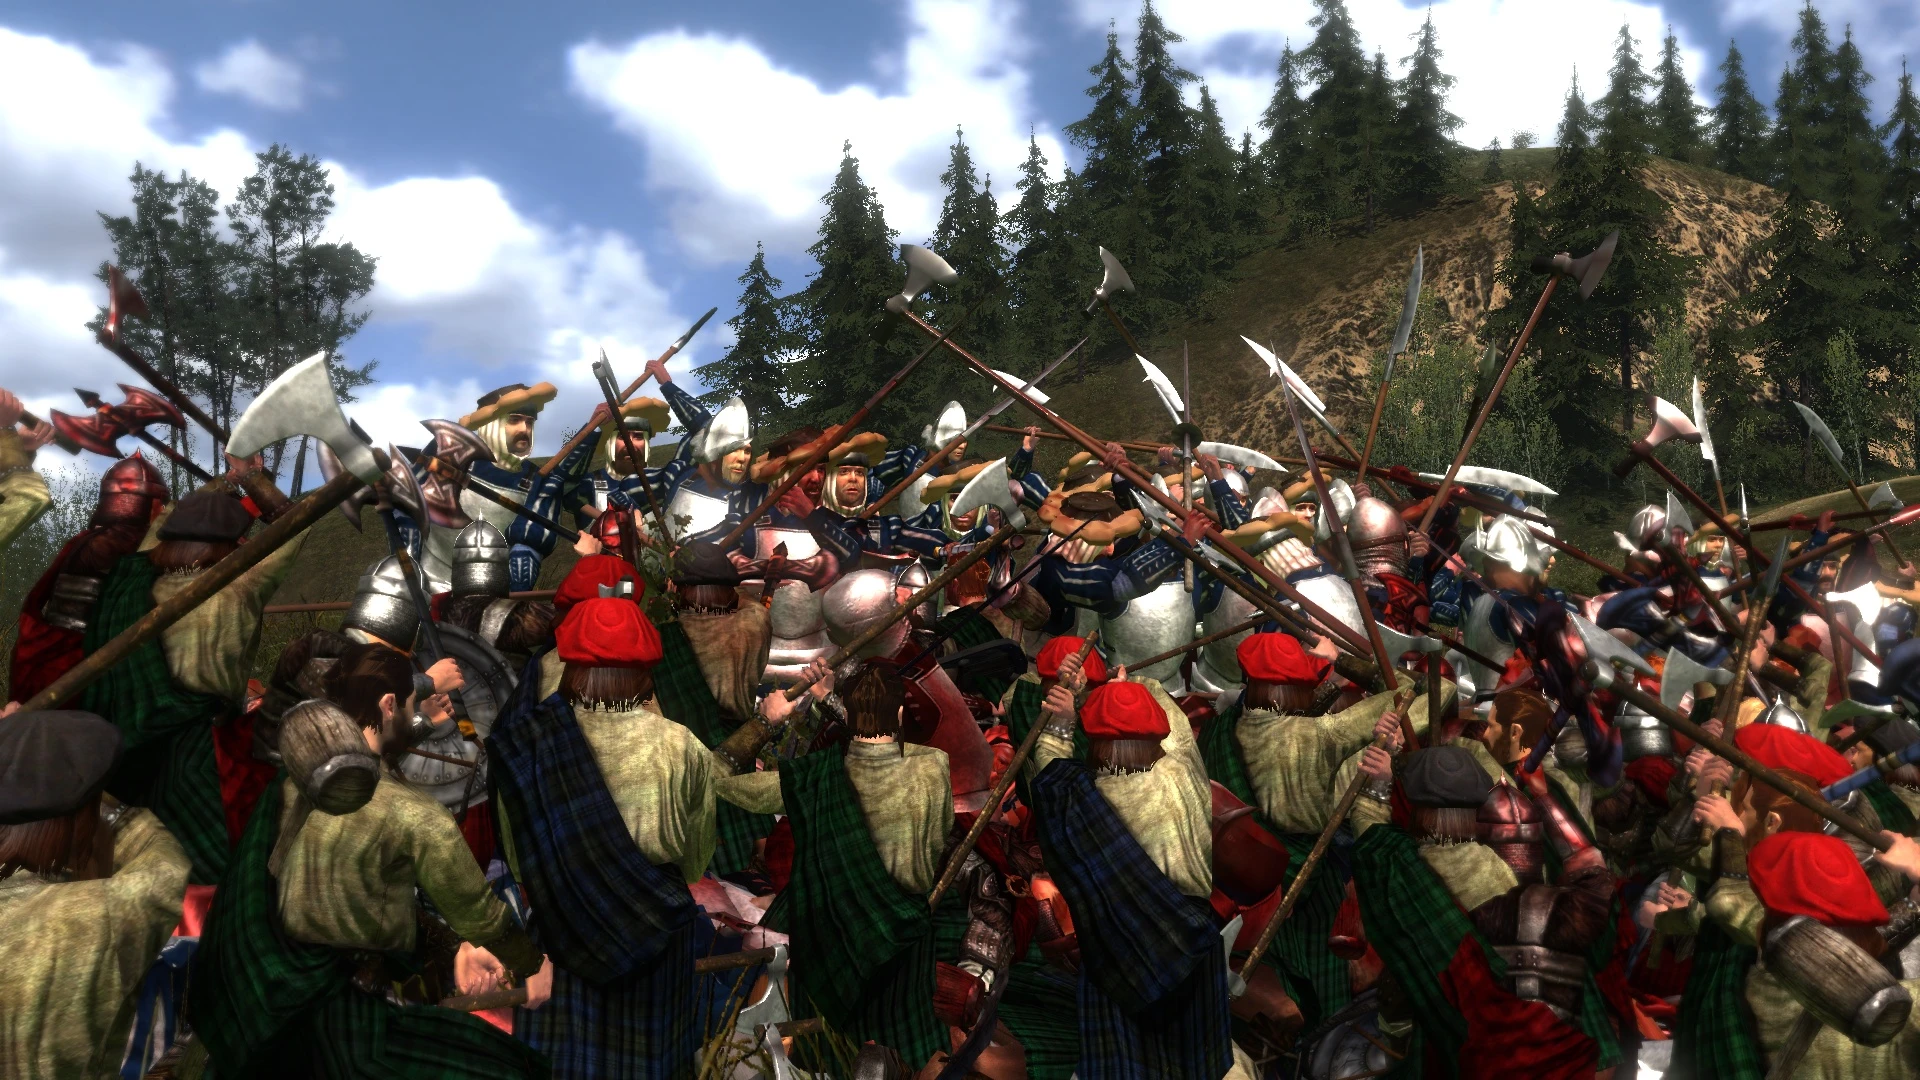 Warband warsword conquest. Warband Warsword. Warband смута. Мод Warhammer Mount and Blade Warband.